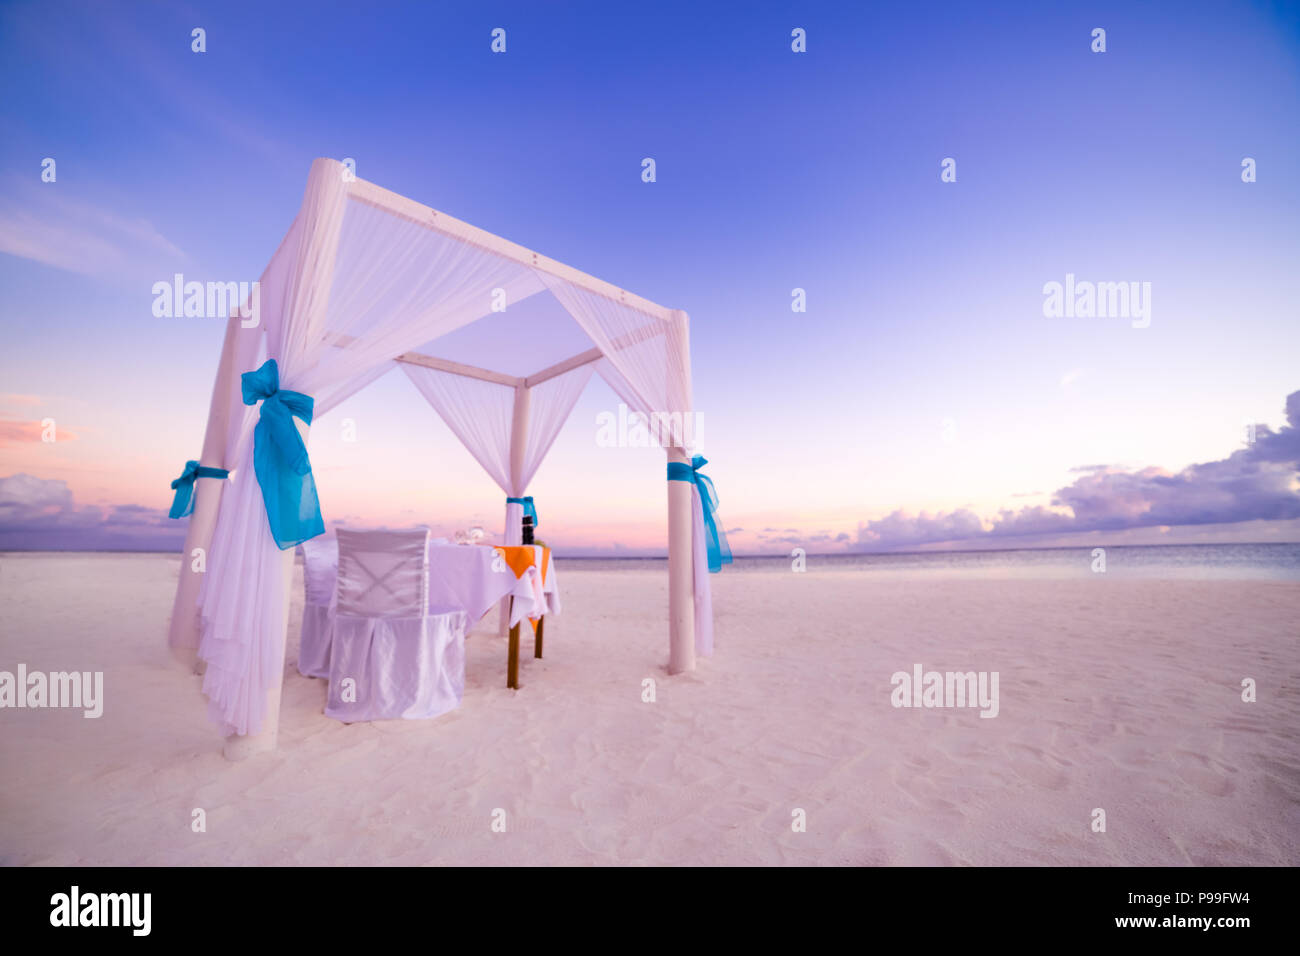 Romantic dinner table set-up for a honeymoon couple on the beach under sunset sky. Exotic wedding and honeymoon concept Stock Photo